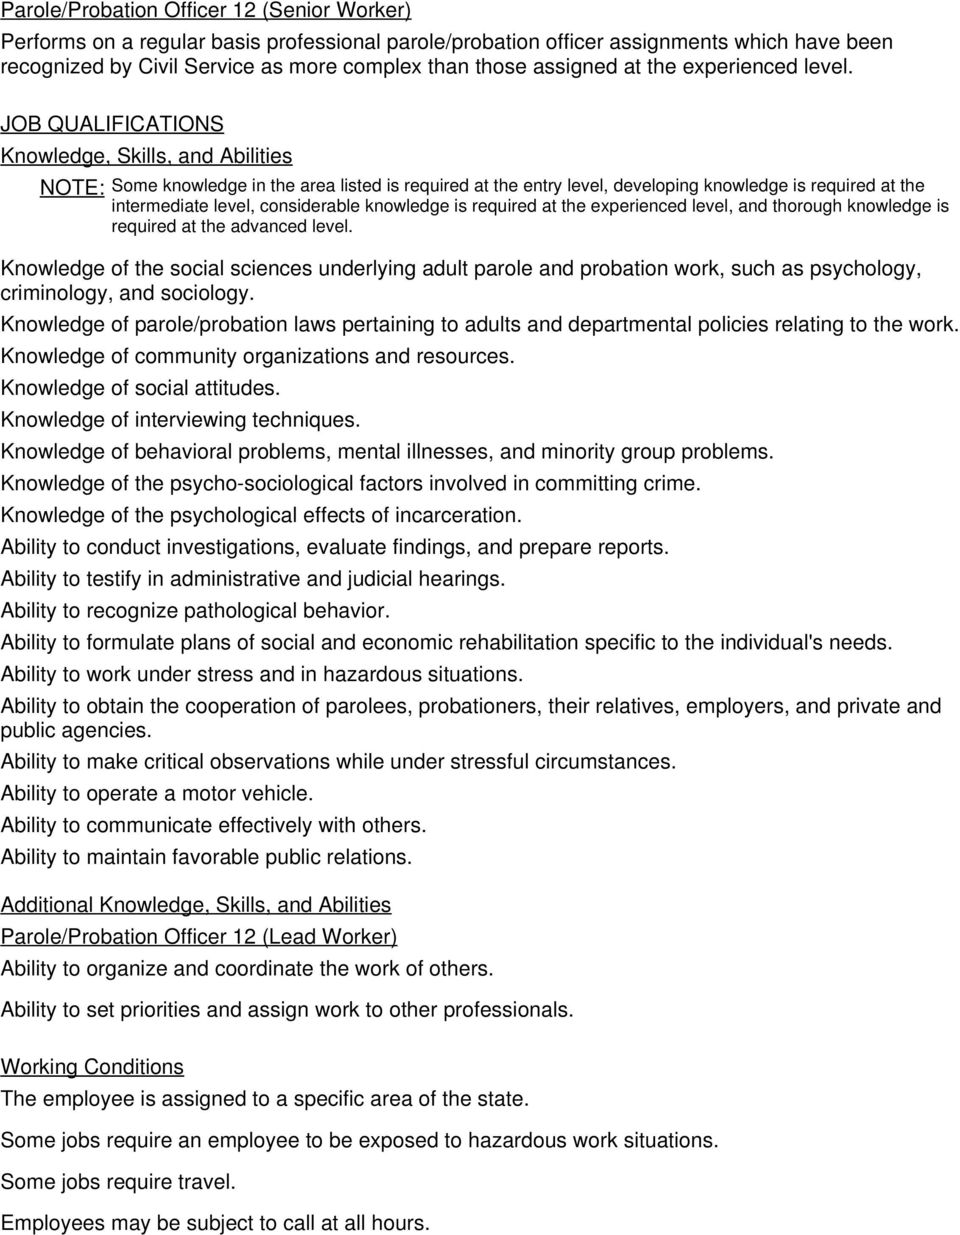 JOB QUALIFICATIONS Knowledge, Skills, and Abilities NOTE: Some knowledge in the area listed is required at the entry level, developing knowledge is required at the intermediate level, considerable